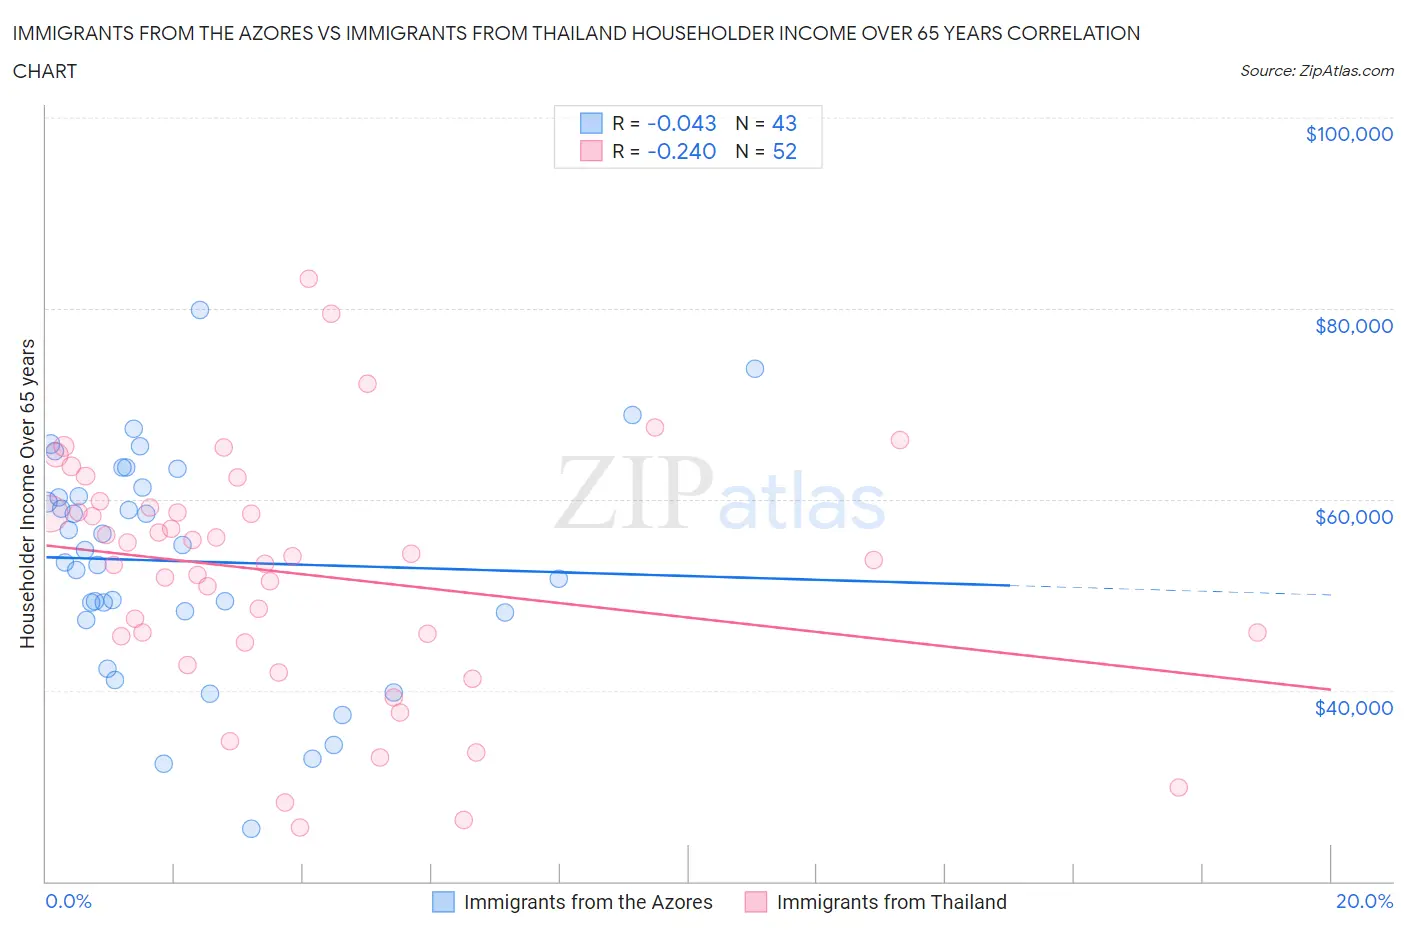 Immigrants from the Azores vs Immigrants from Thailand Householder Income Over 65 years